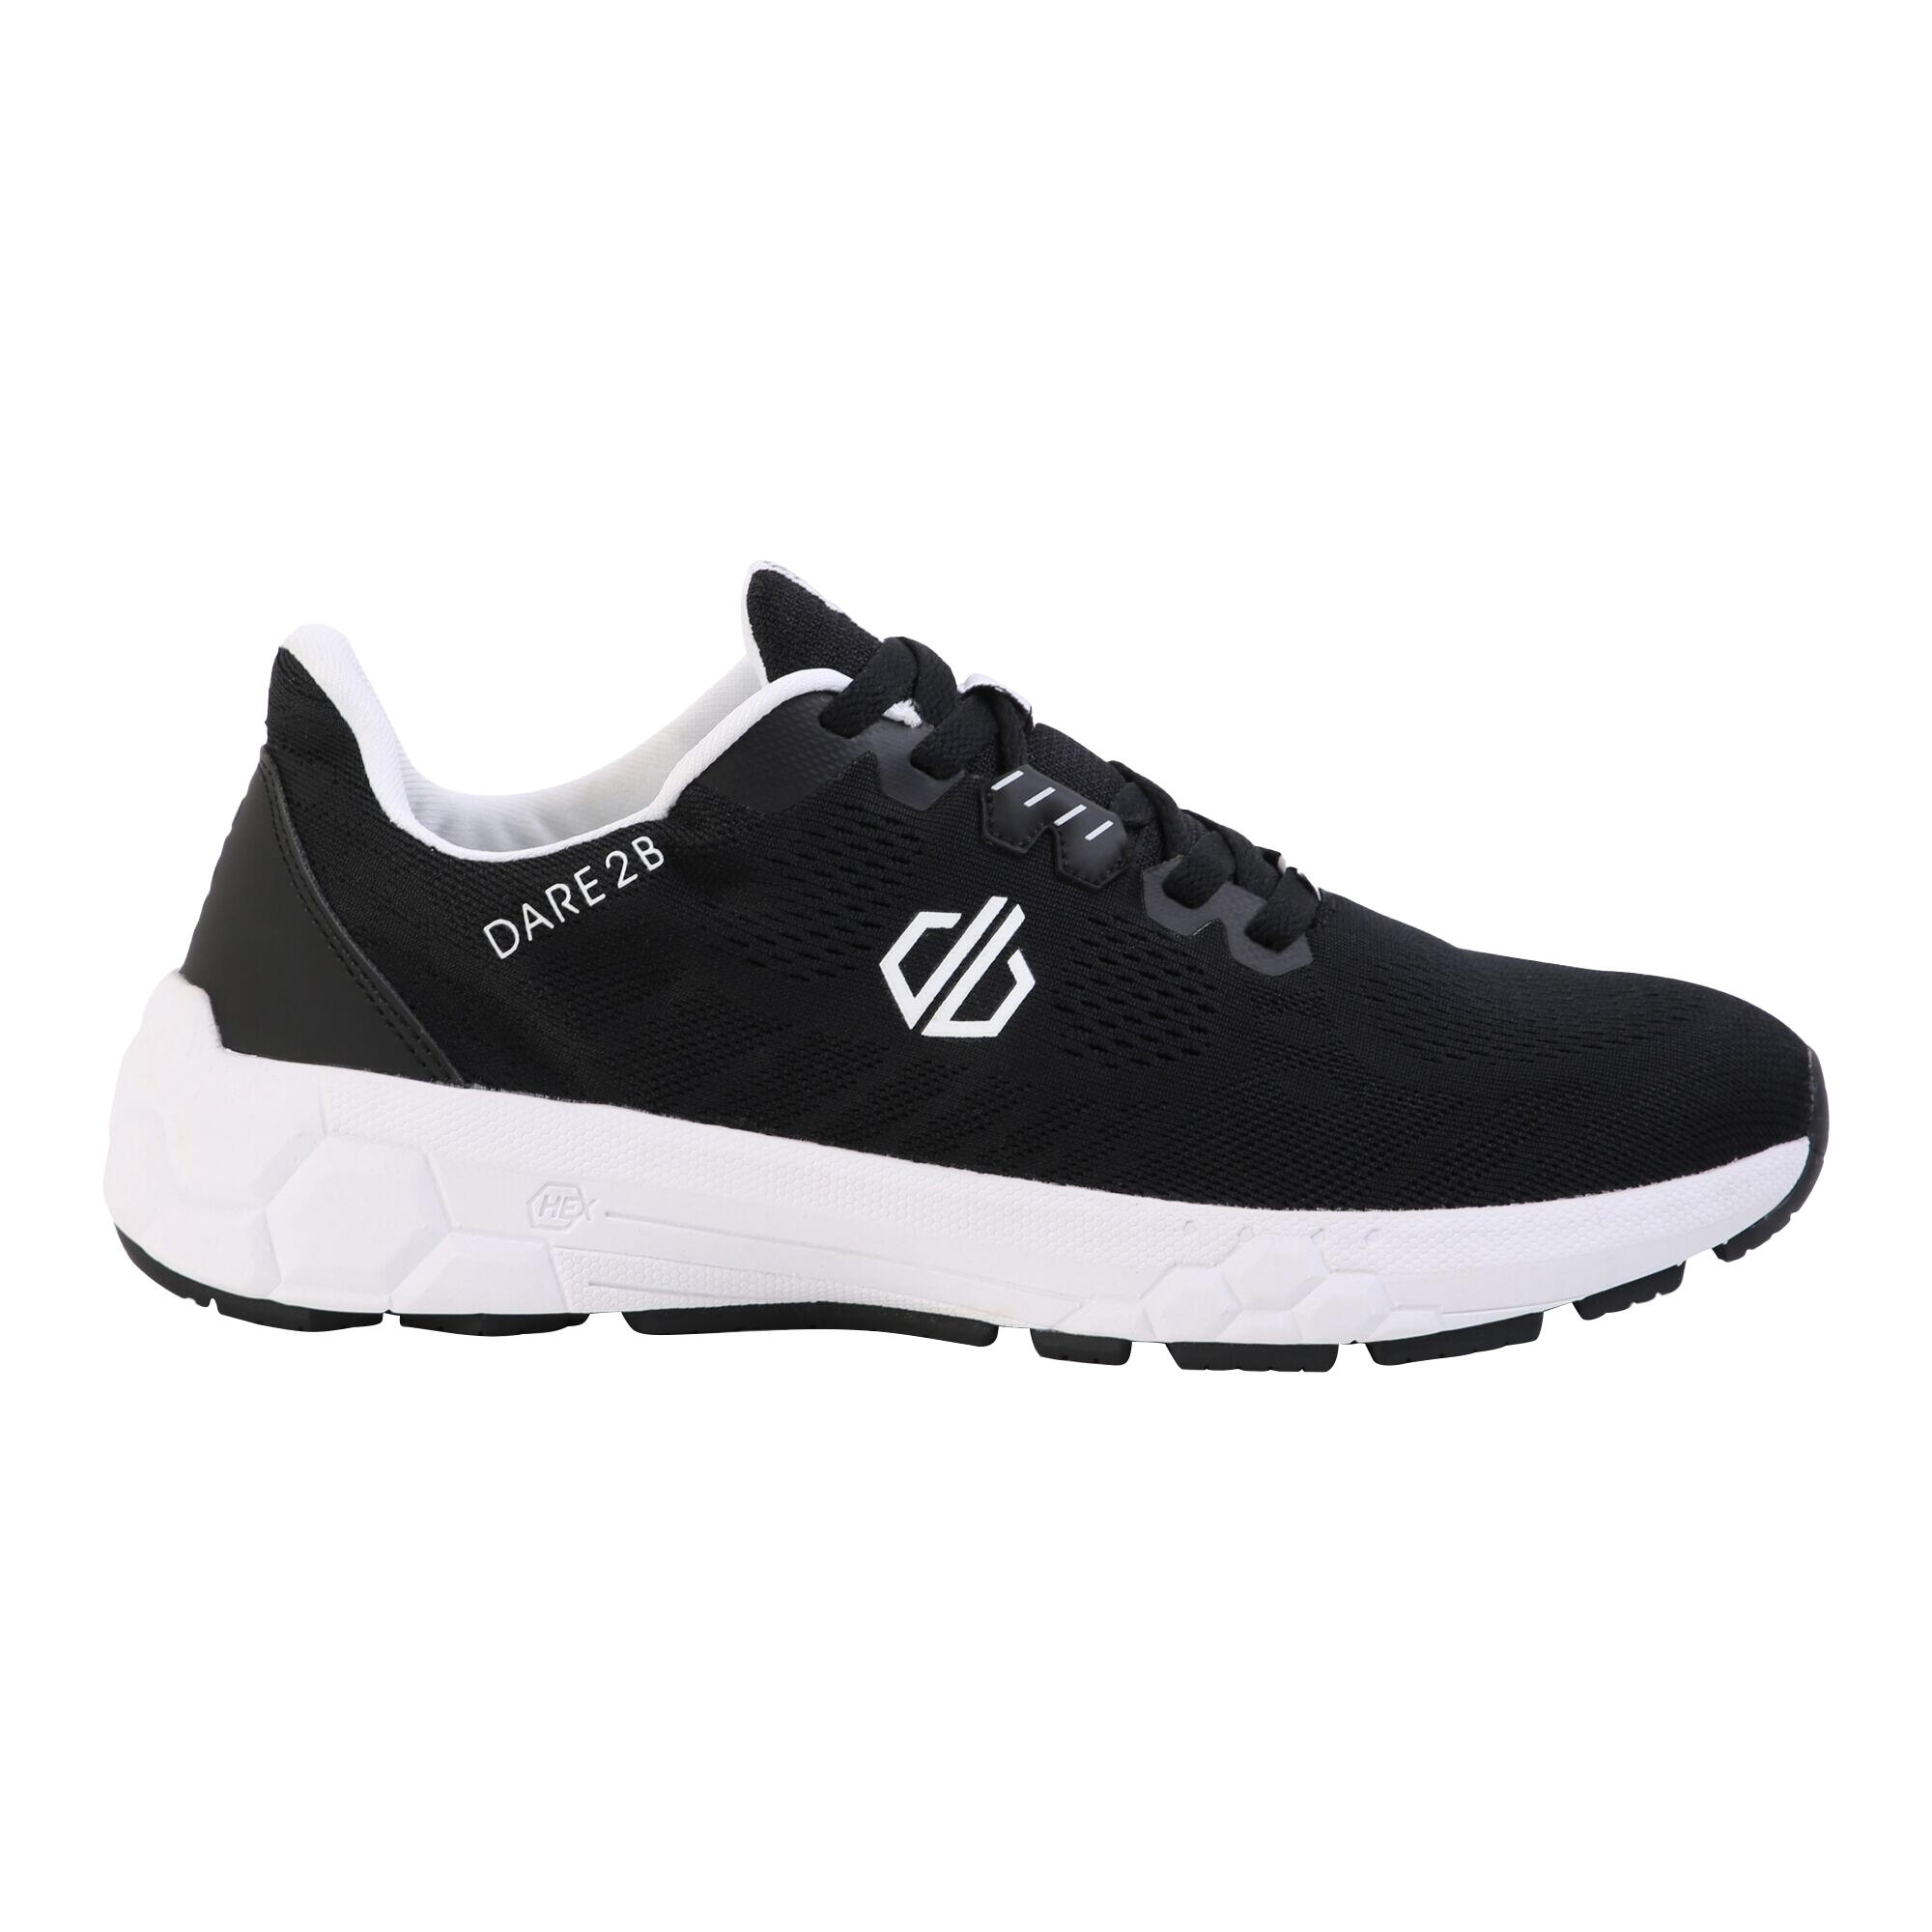 Mens Hex Rapid Performance Trainers (Black/White) 1/5